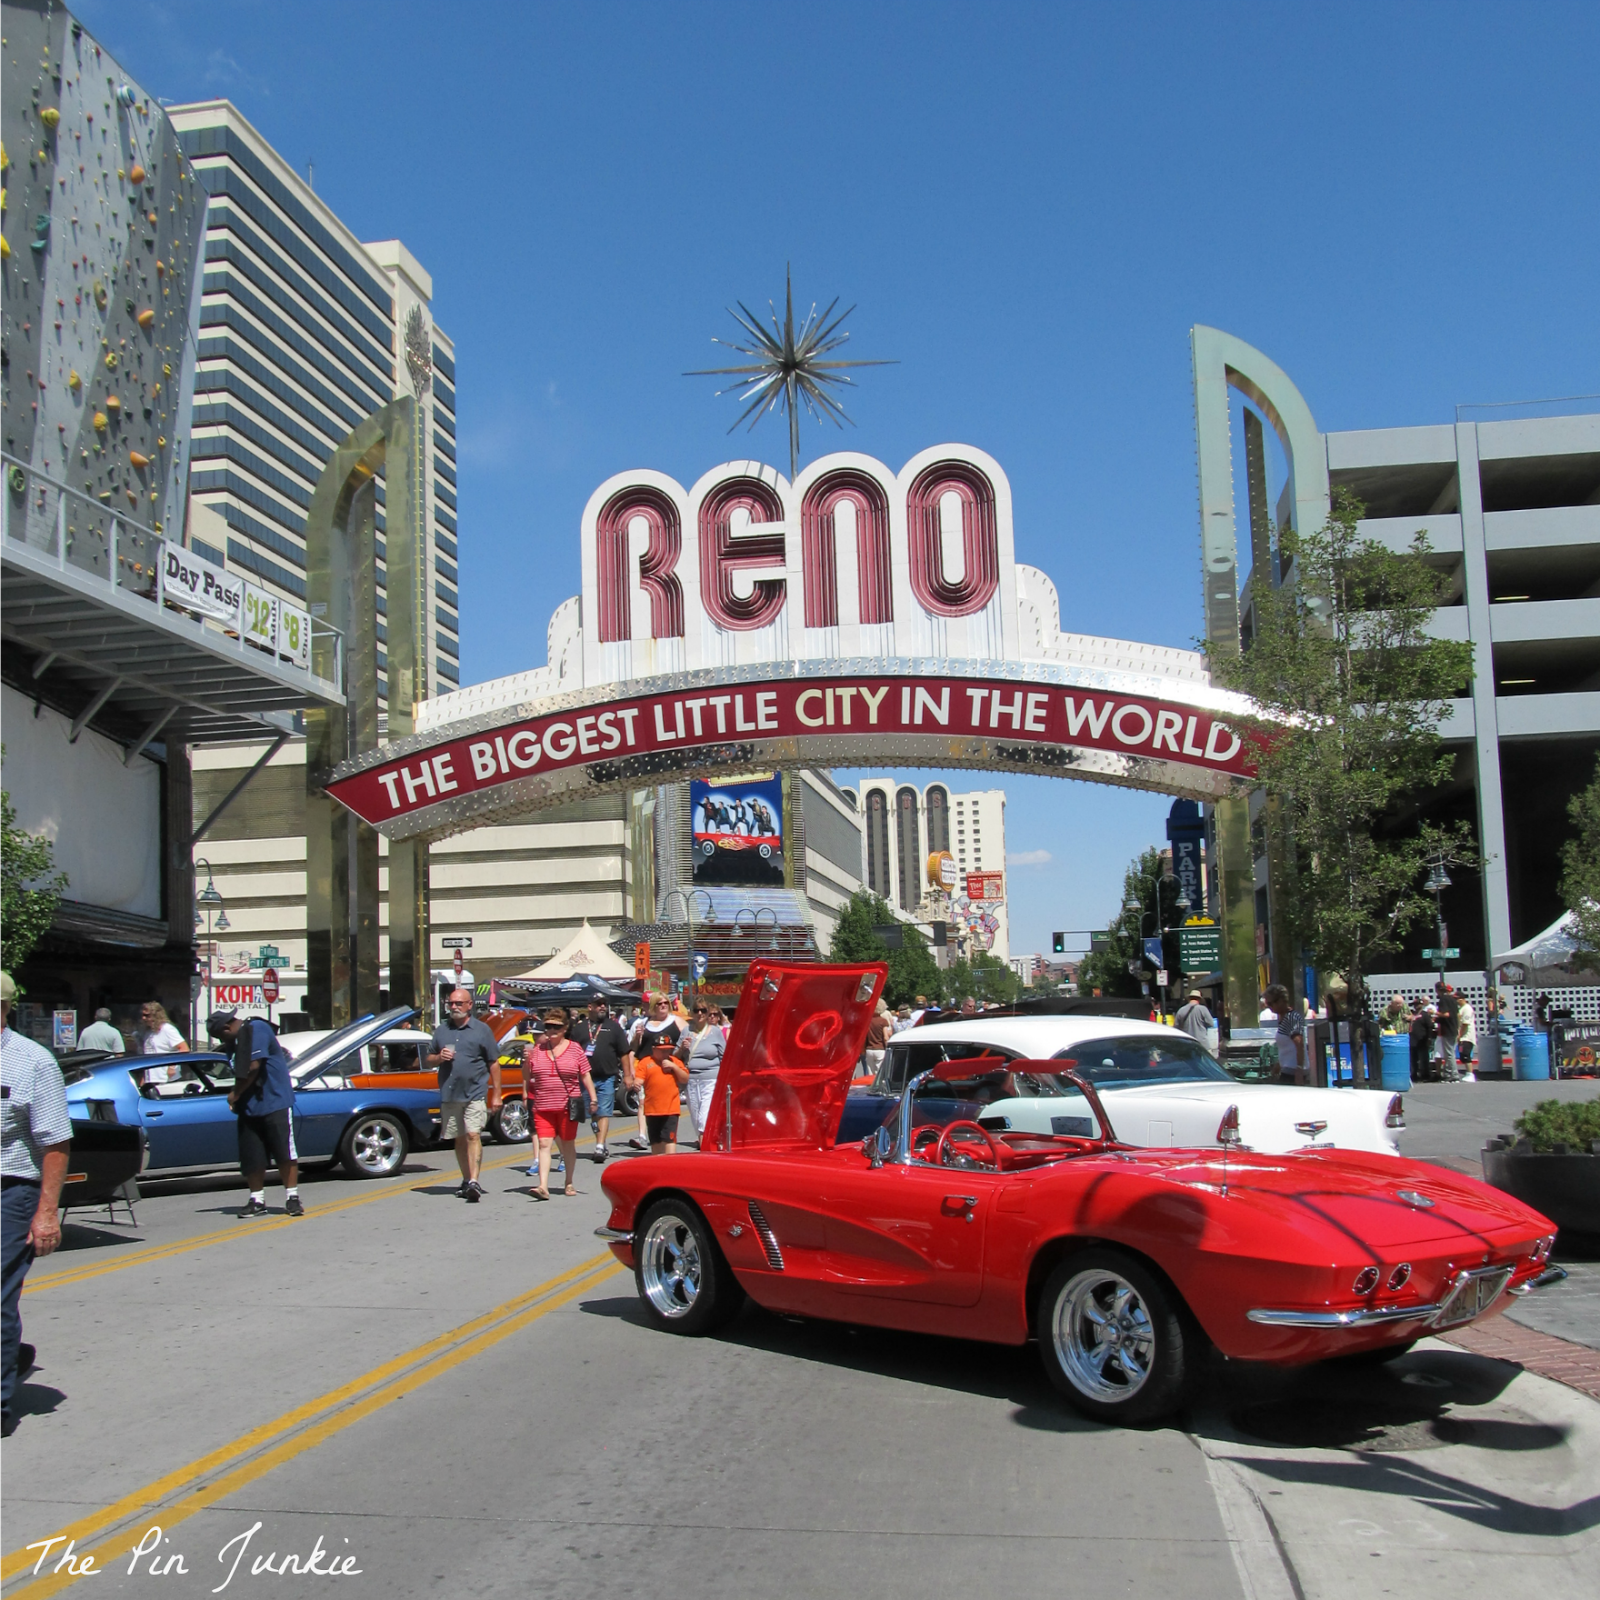 Hot August Nights Car Show in Reno